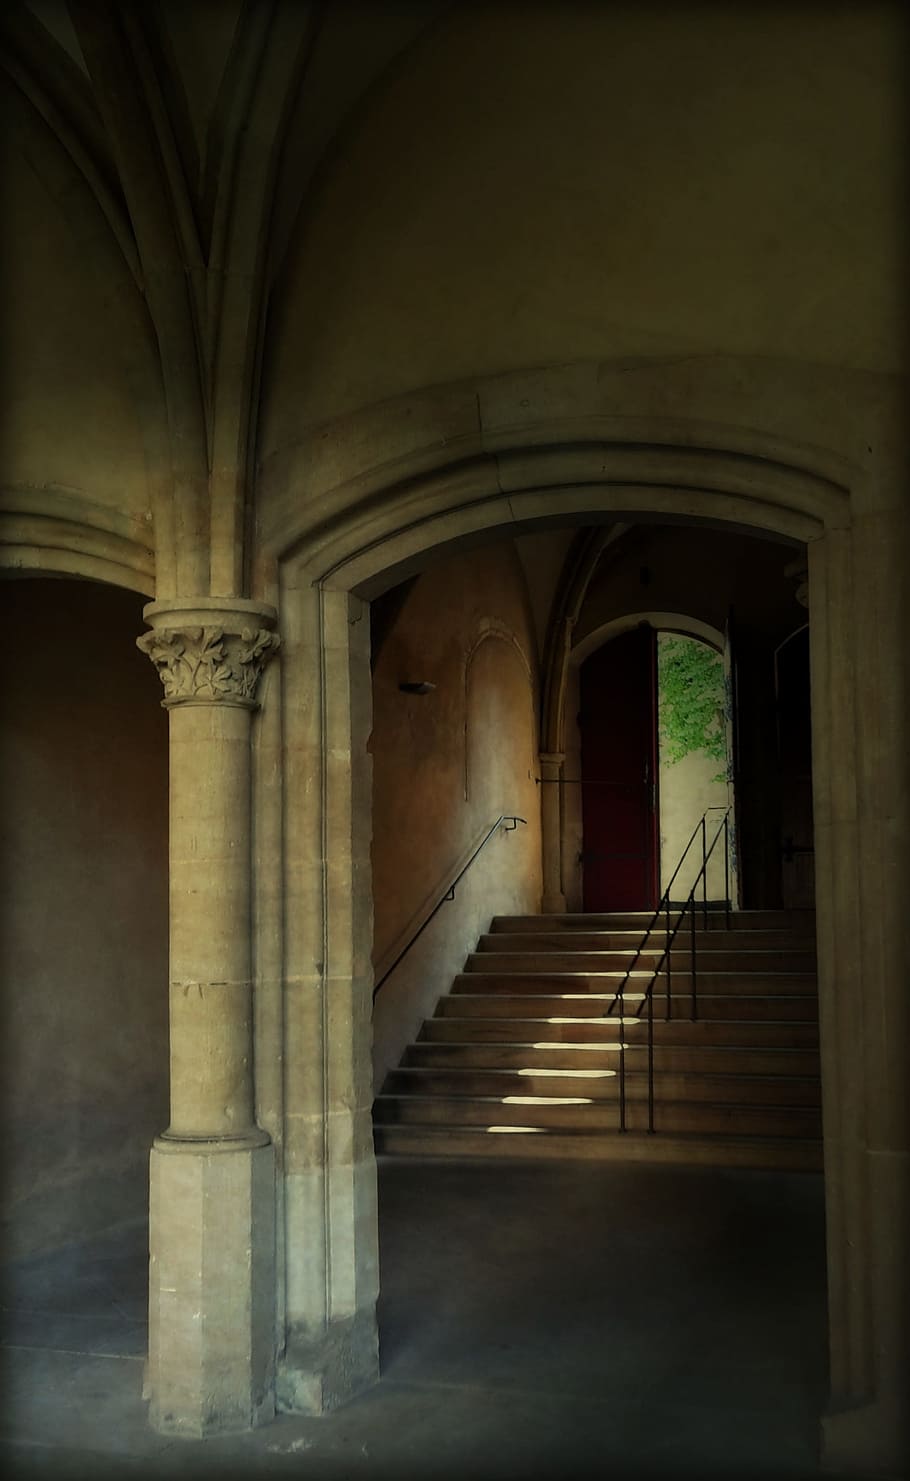 stairs, rails, doorway, church, cathedral, architecture, arcades, goal, door, cloister